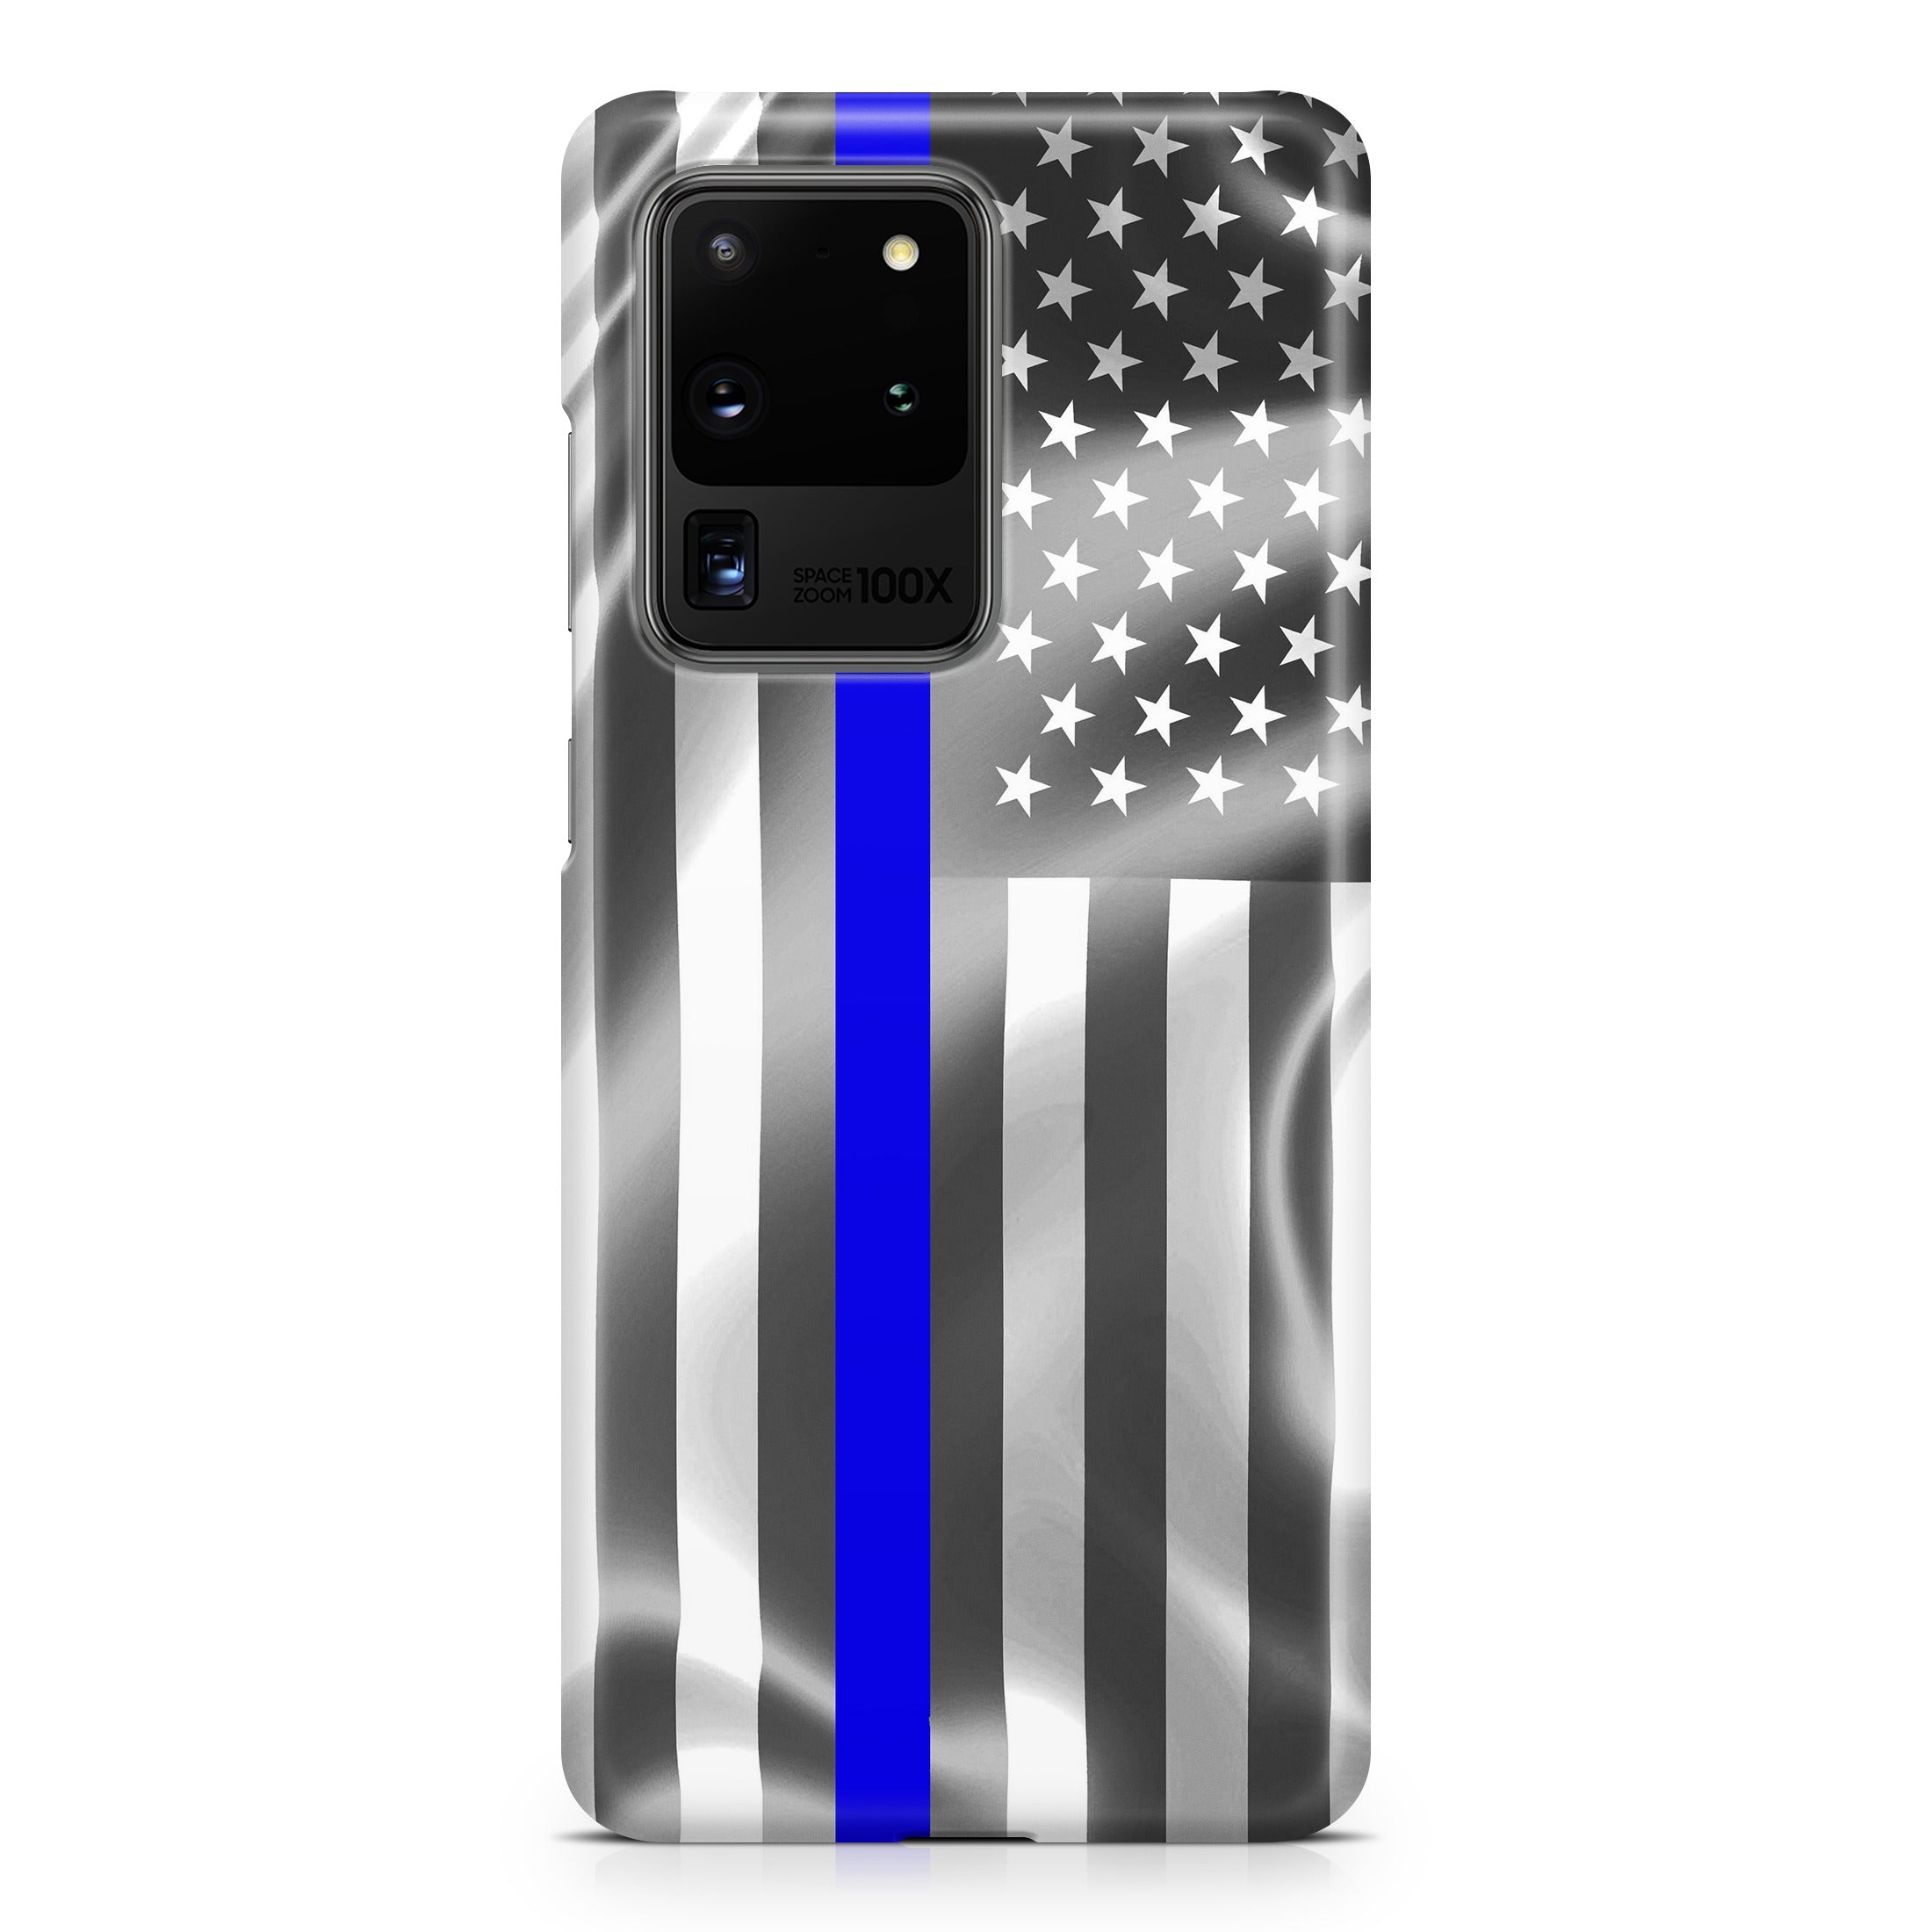 Thin Blue Line - Samsung phone case designs by CaseSwagger